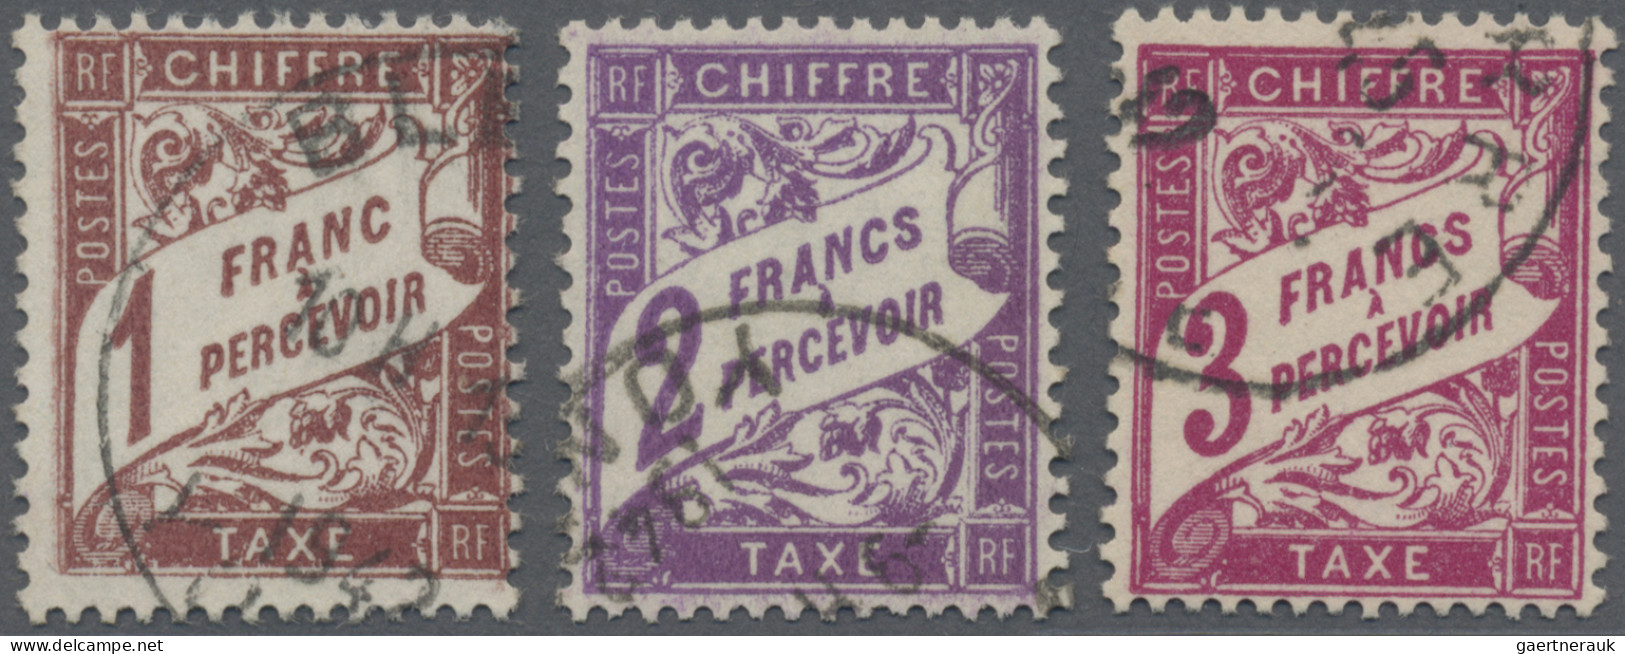 France - Postage Dues: 1884, 1 Fr. - 5 Fr. Red Brown, 3 Stamps, Used, 600,- - 1960-.... Used